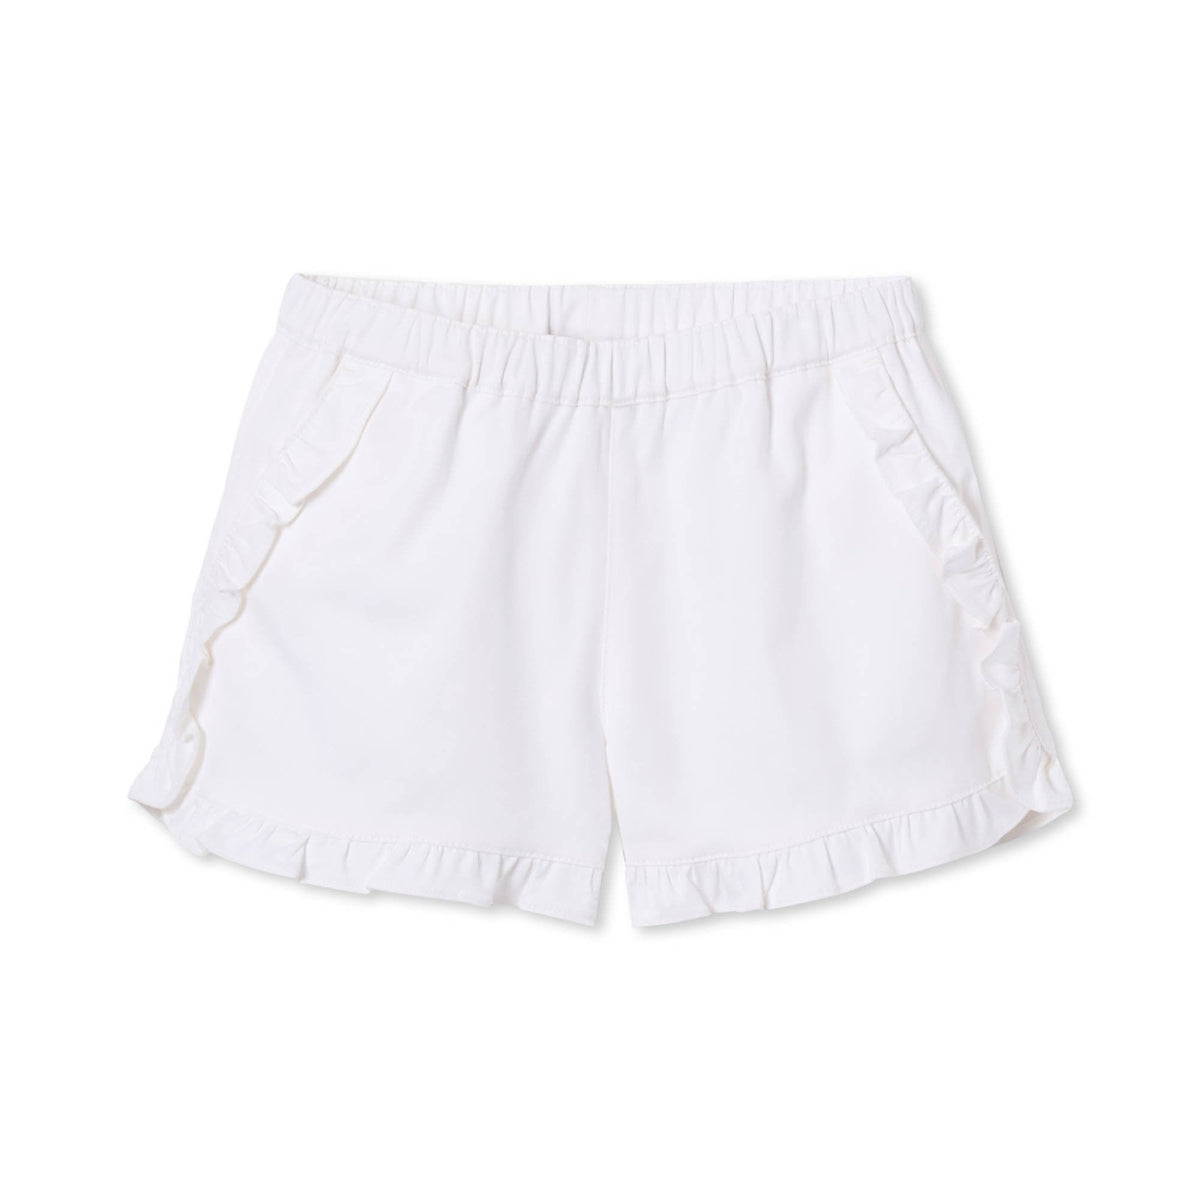 Classic and Preppy Milly Short, Bright White-Bottoms-Bright White-XS (2-3T)-CPC - Classic Prep Childrenswear